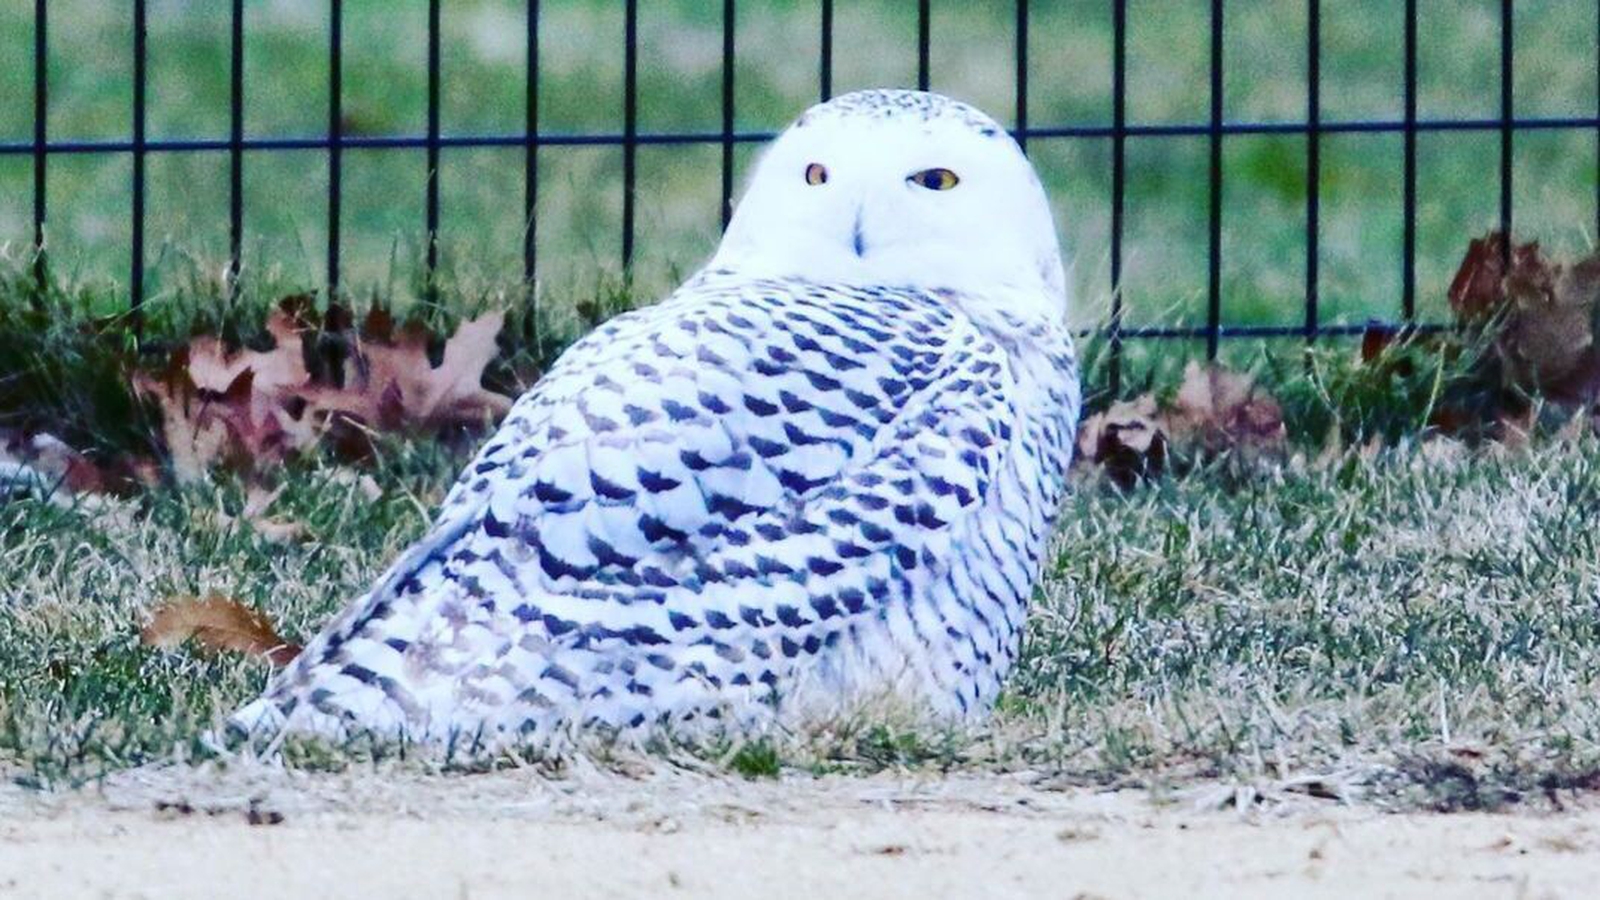 Snowy owl spotted in NY for first time in 130 years